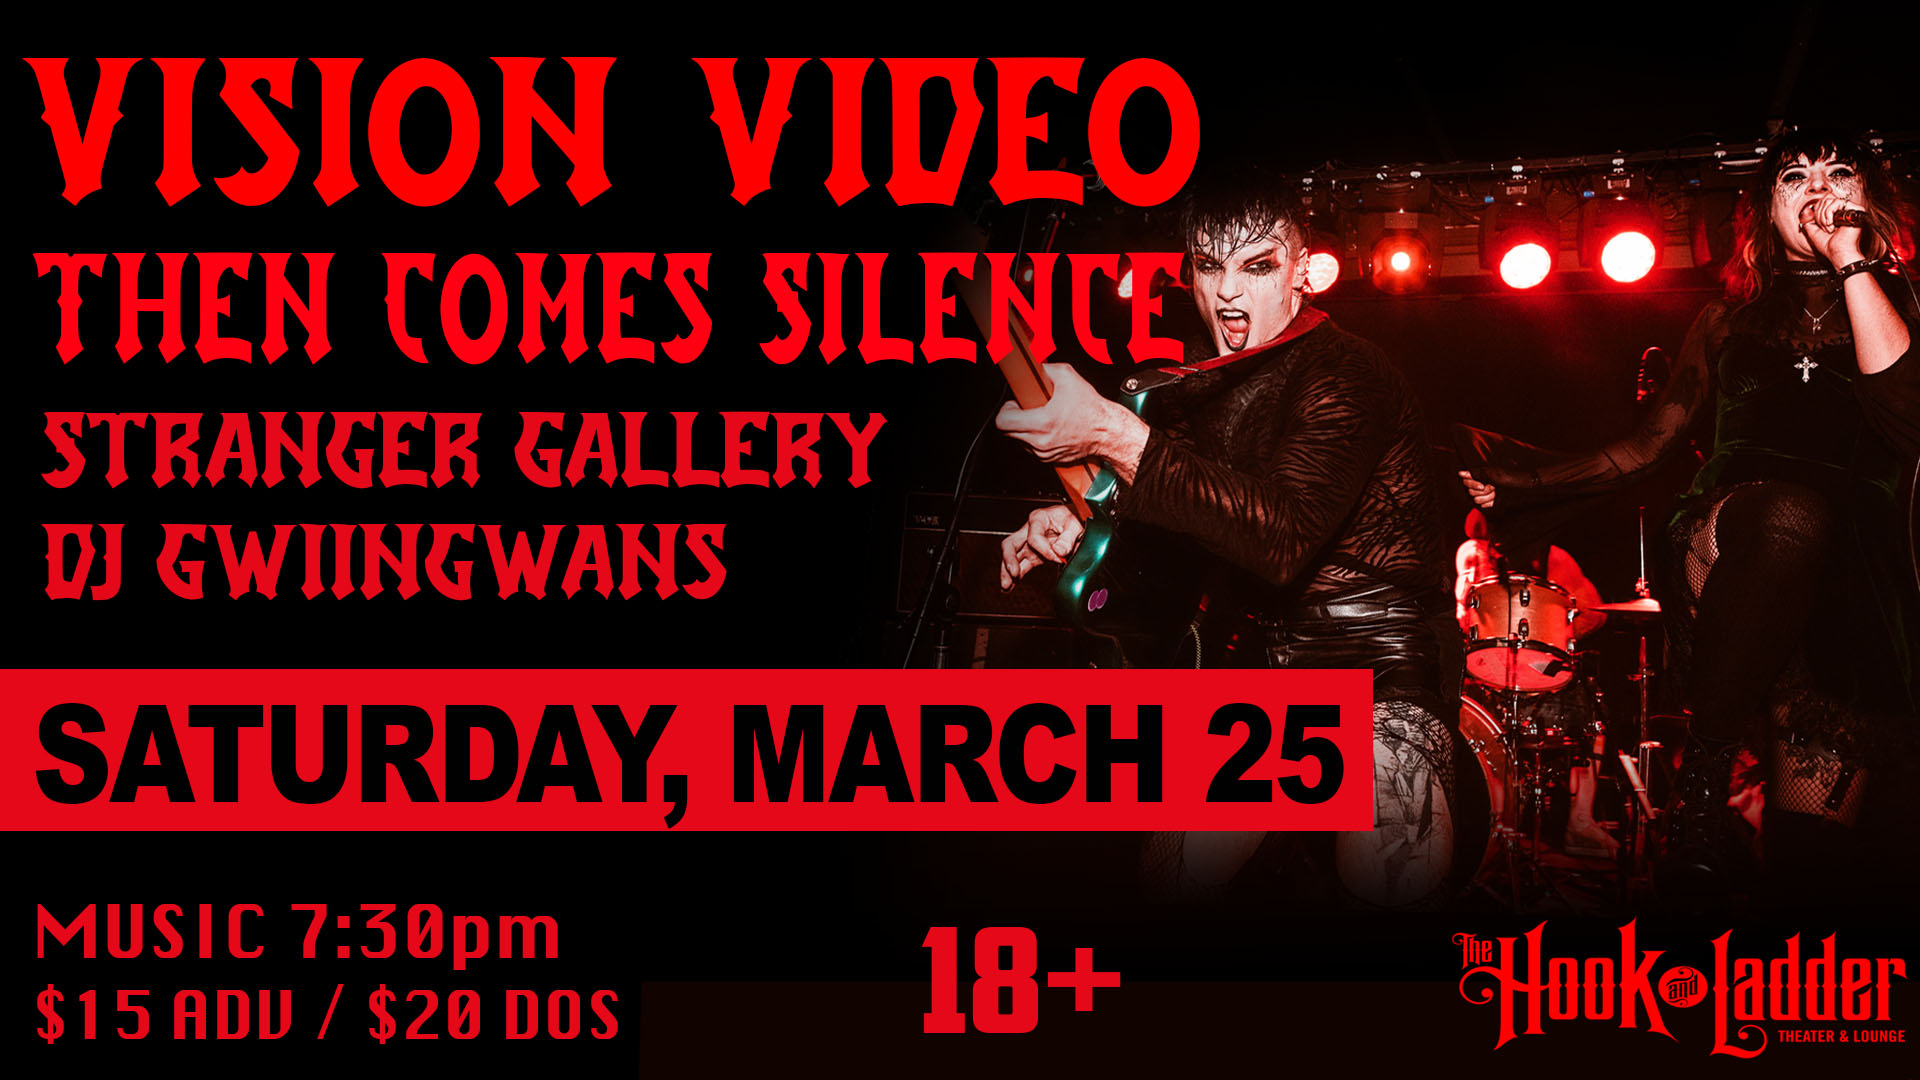 Vision Video Then Comes Silence Stranger Gallery DJ Gwiingwans Saturday March 25 The Hook and Ladder Theater Doors 7:30pm :: Music 7:30pm :: 18+ General Admission * $15 ADV / $20 DOS * Does not include fees NO REFUNDS